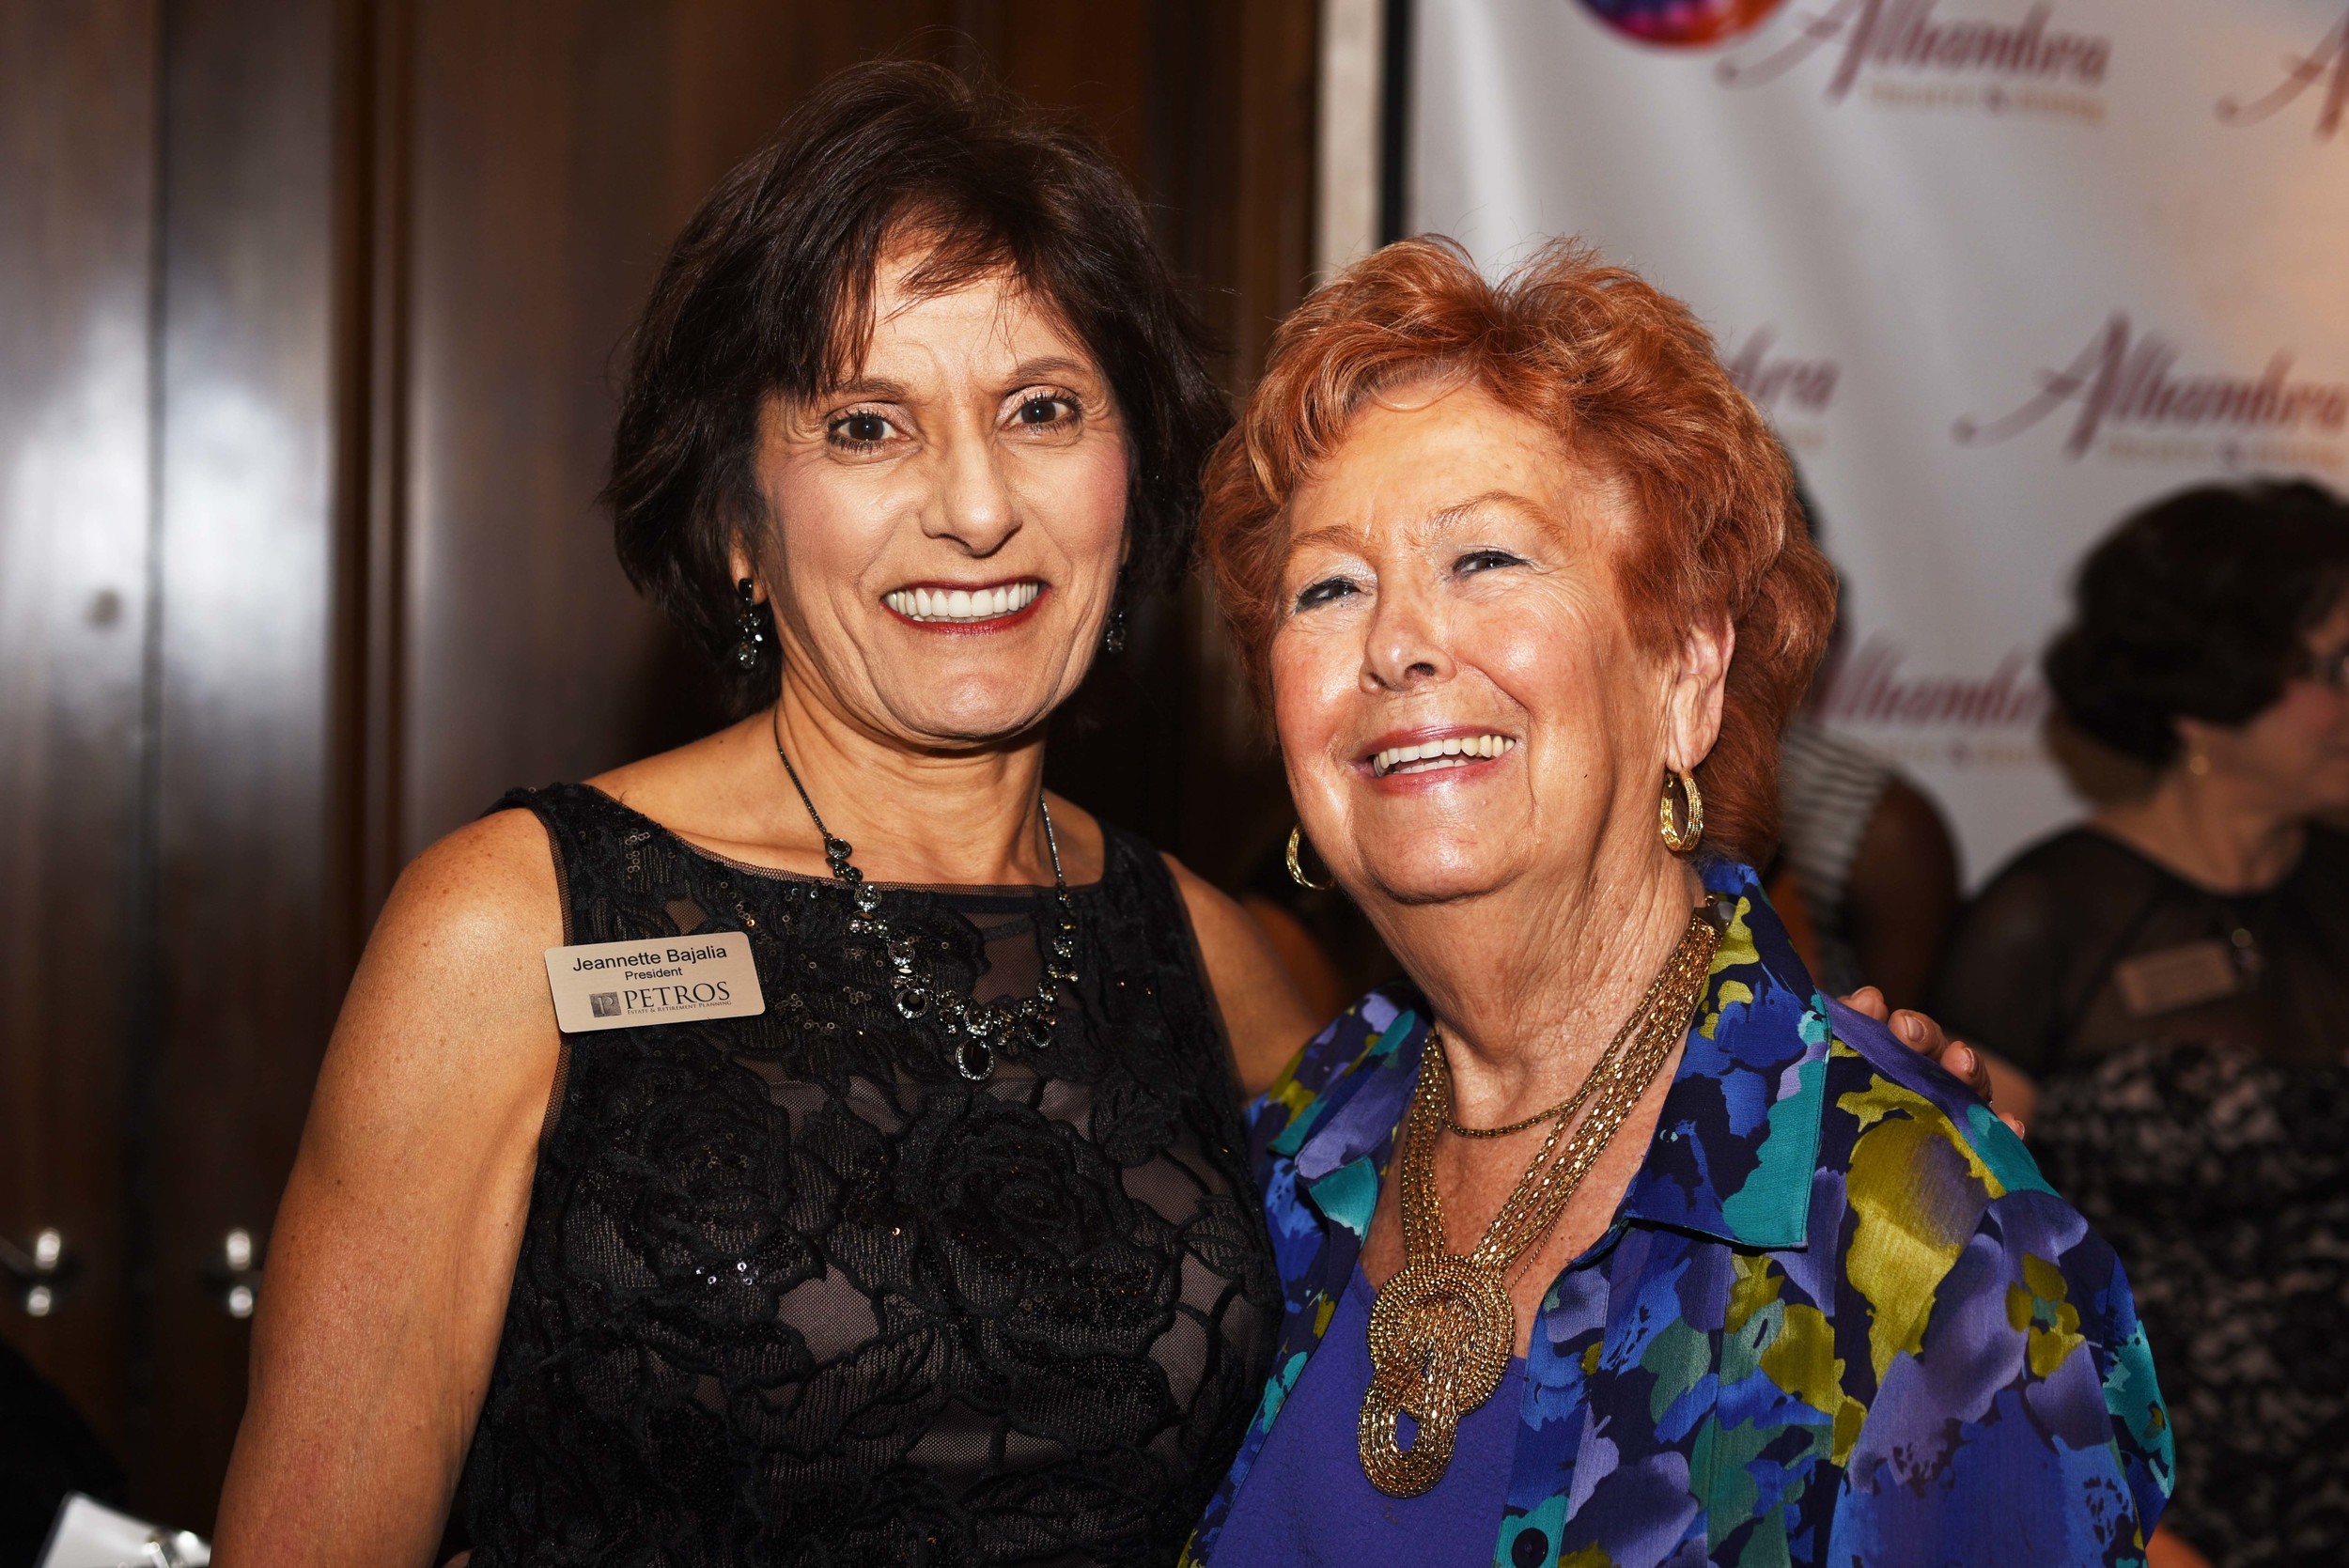 Jeannette Bajalia, Petros Estate & Retirement Planning president and principal advisor and founder and president of Woman’s Worth with Joan Foley